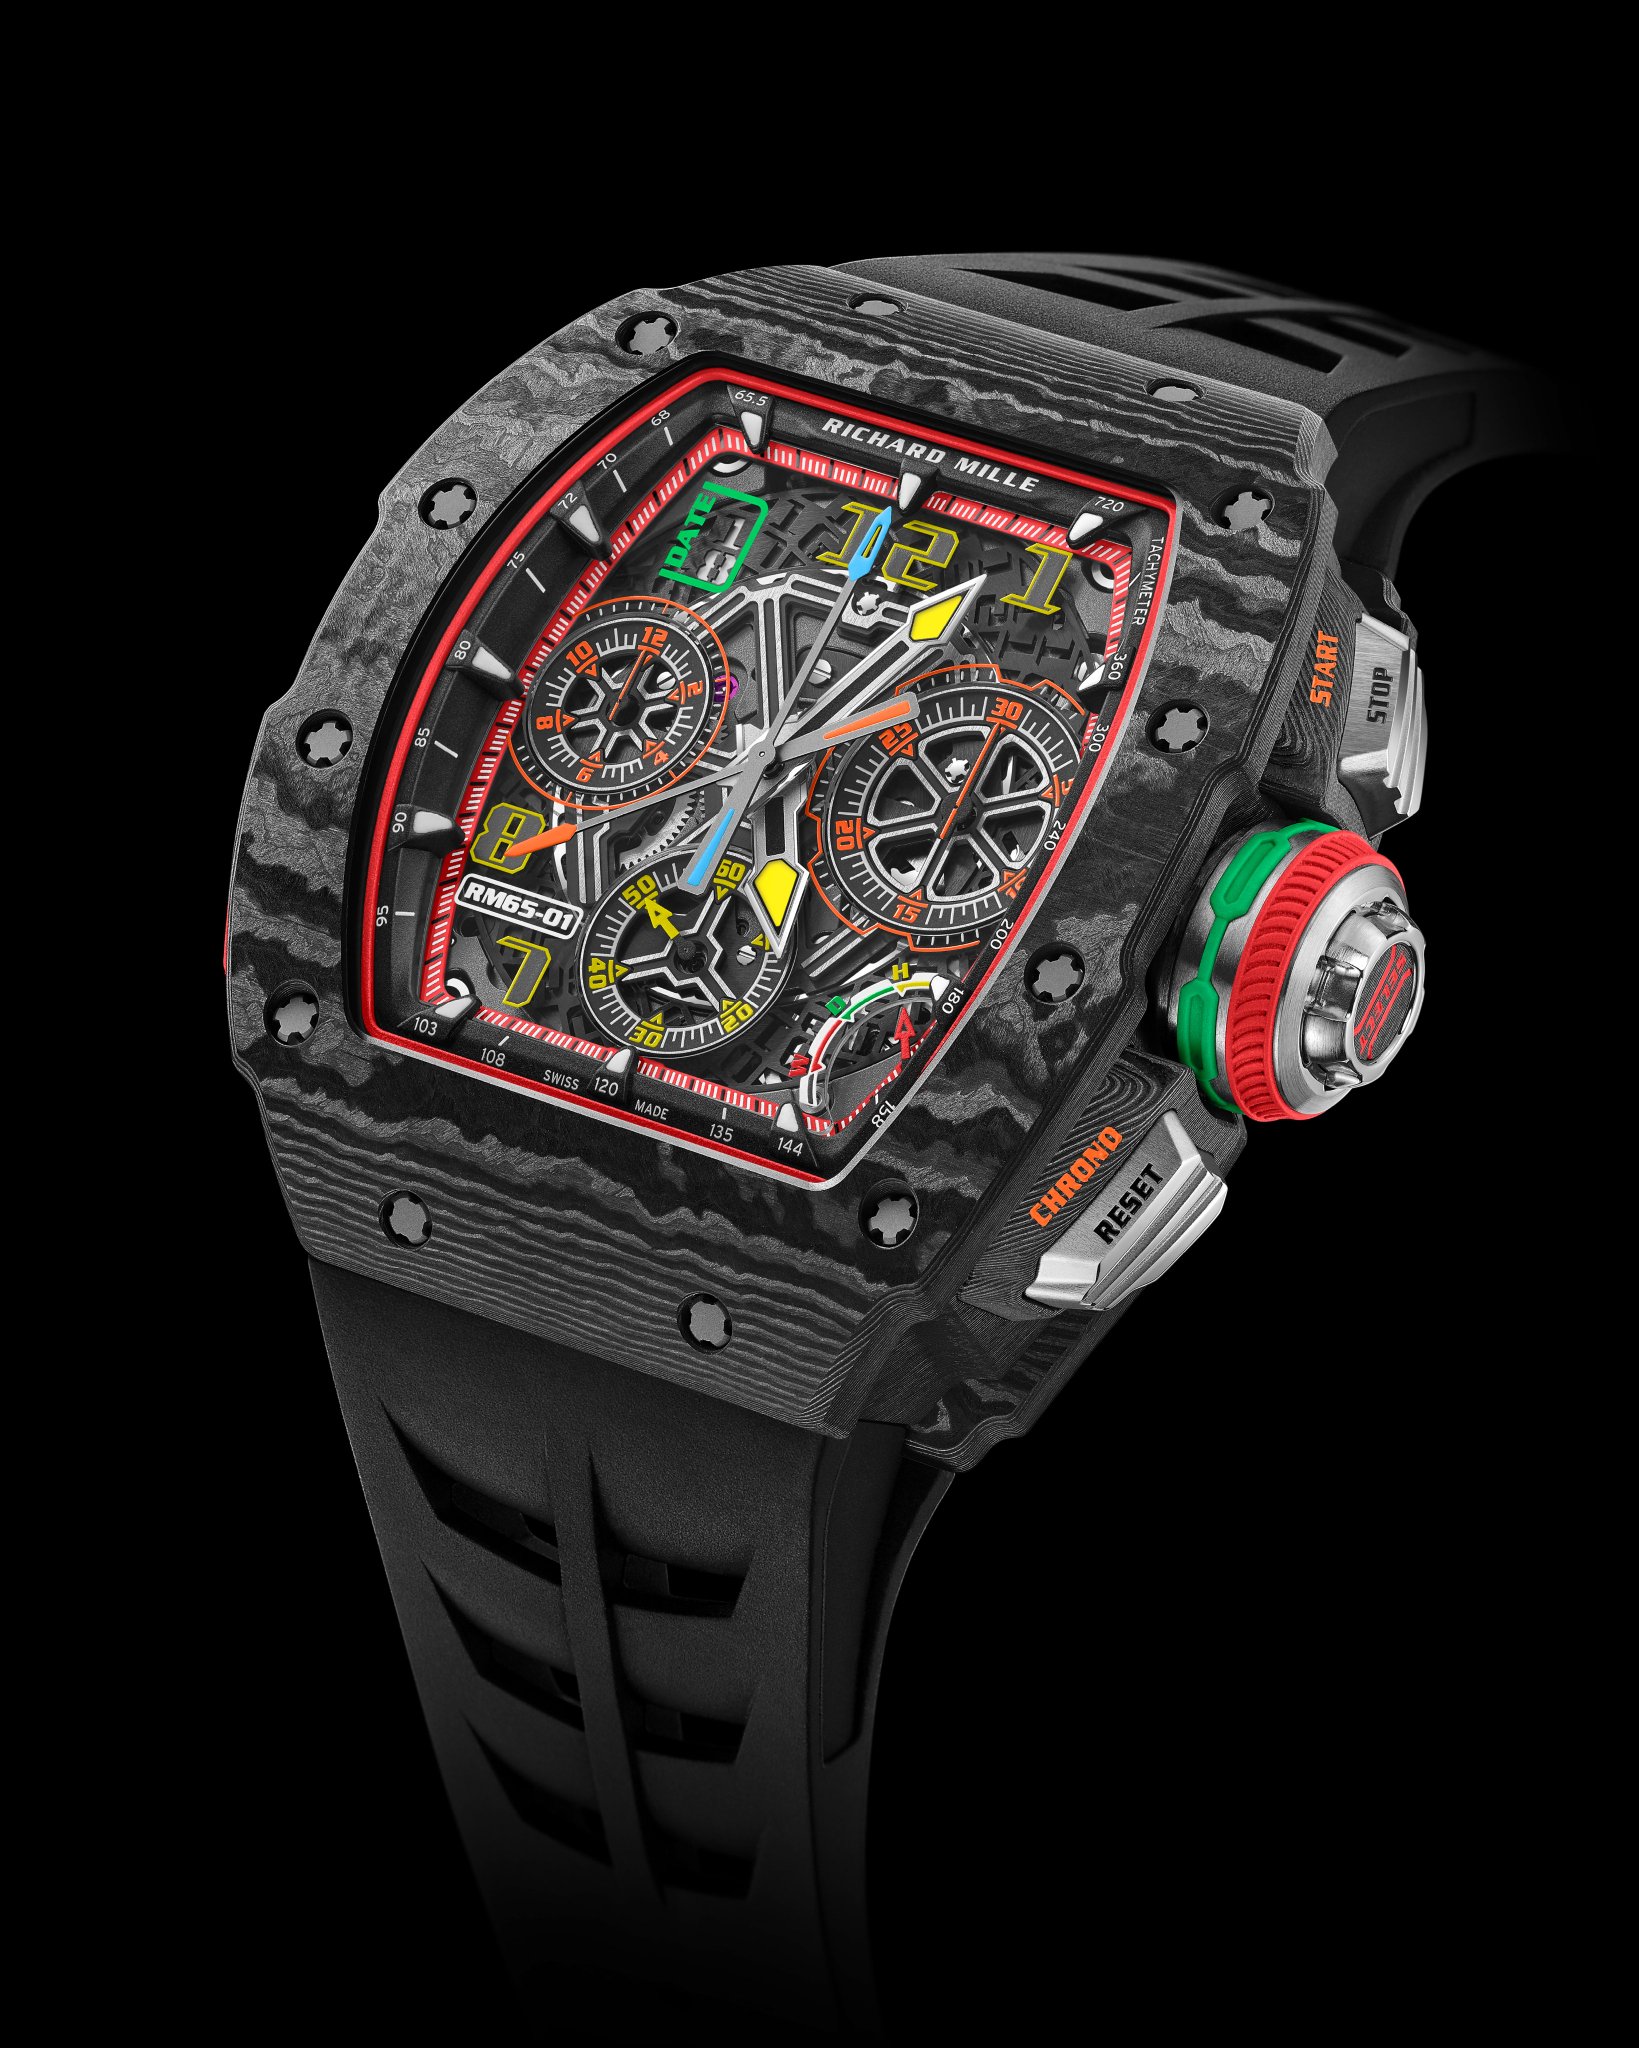 Richard Mille First Automatic Split Seconds Timepiece The Rm 65 01 Combines The Mechanical Soul Of The Rm 004 And The User Friendliness Of An Automatic Watch For Everyday Use T Co Cg0n8dwevj Richardmille Rm6501